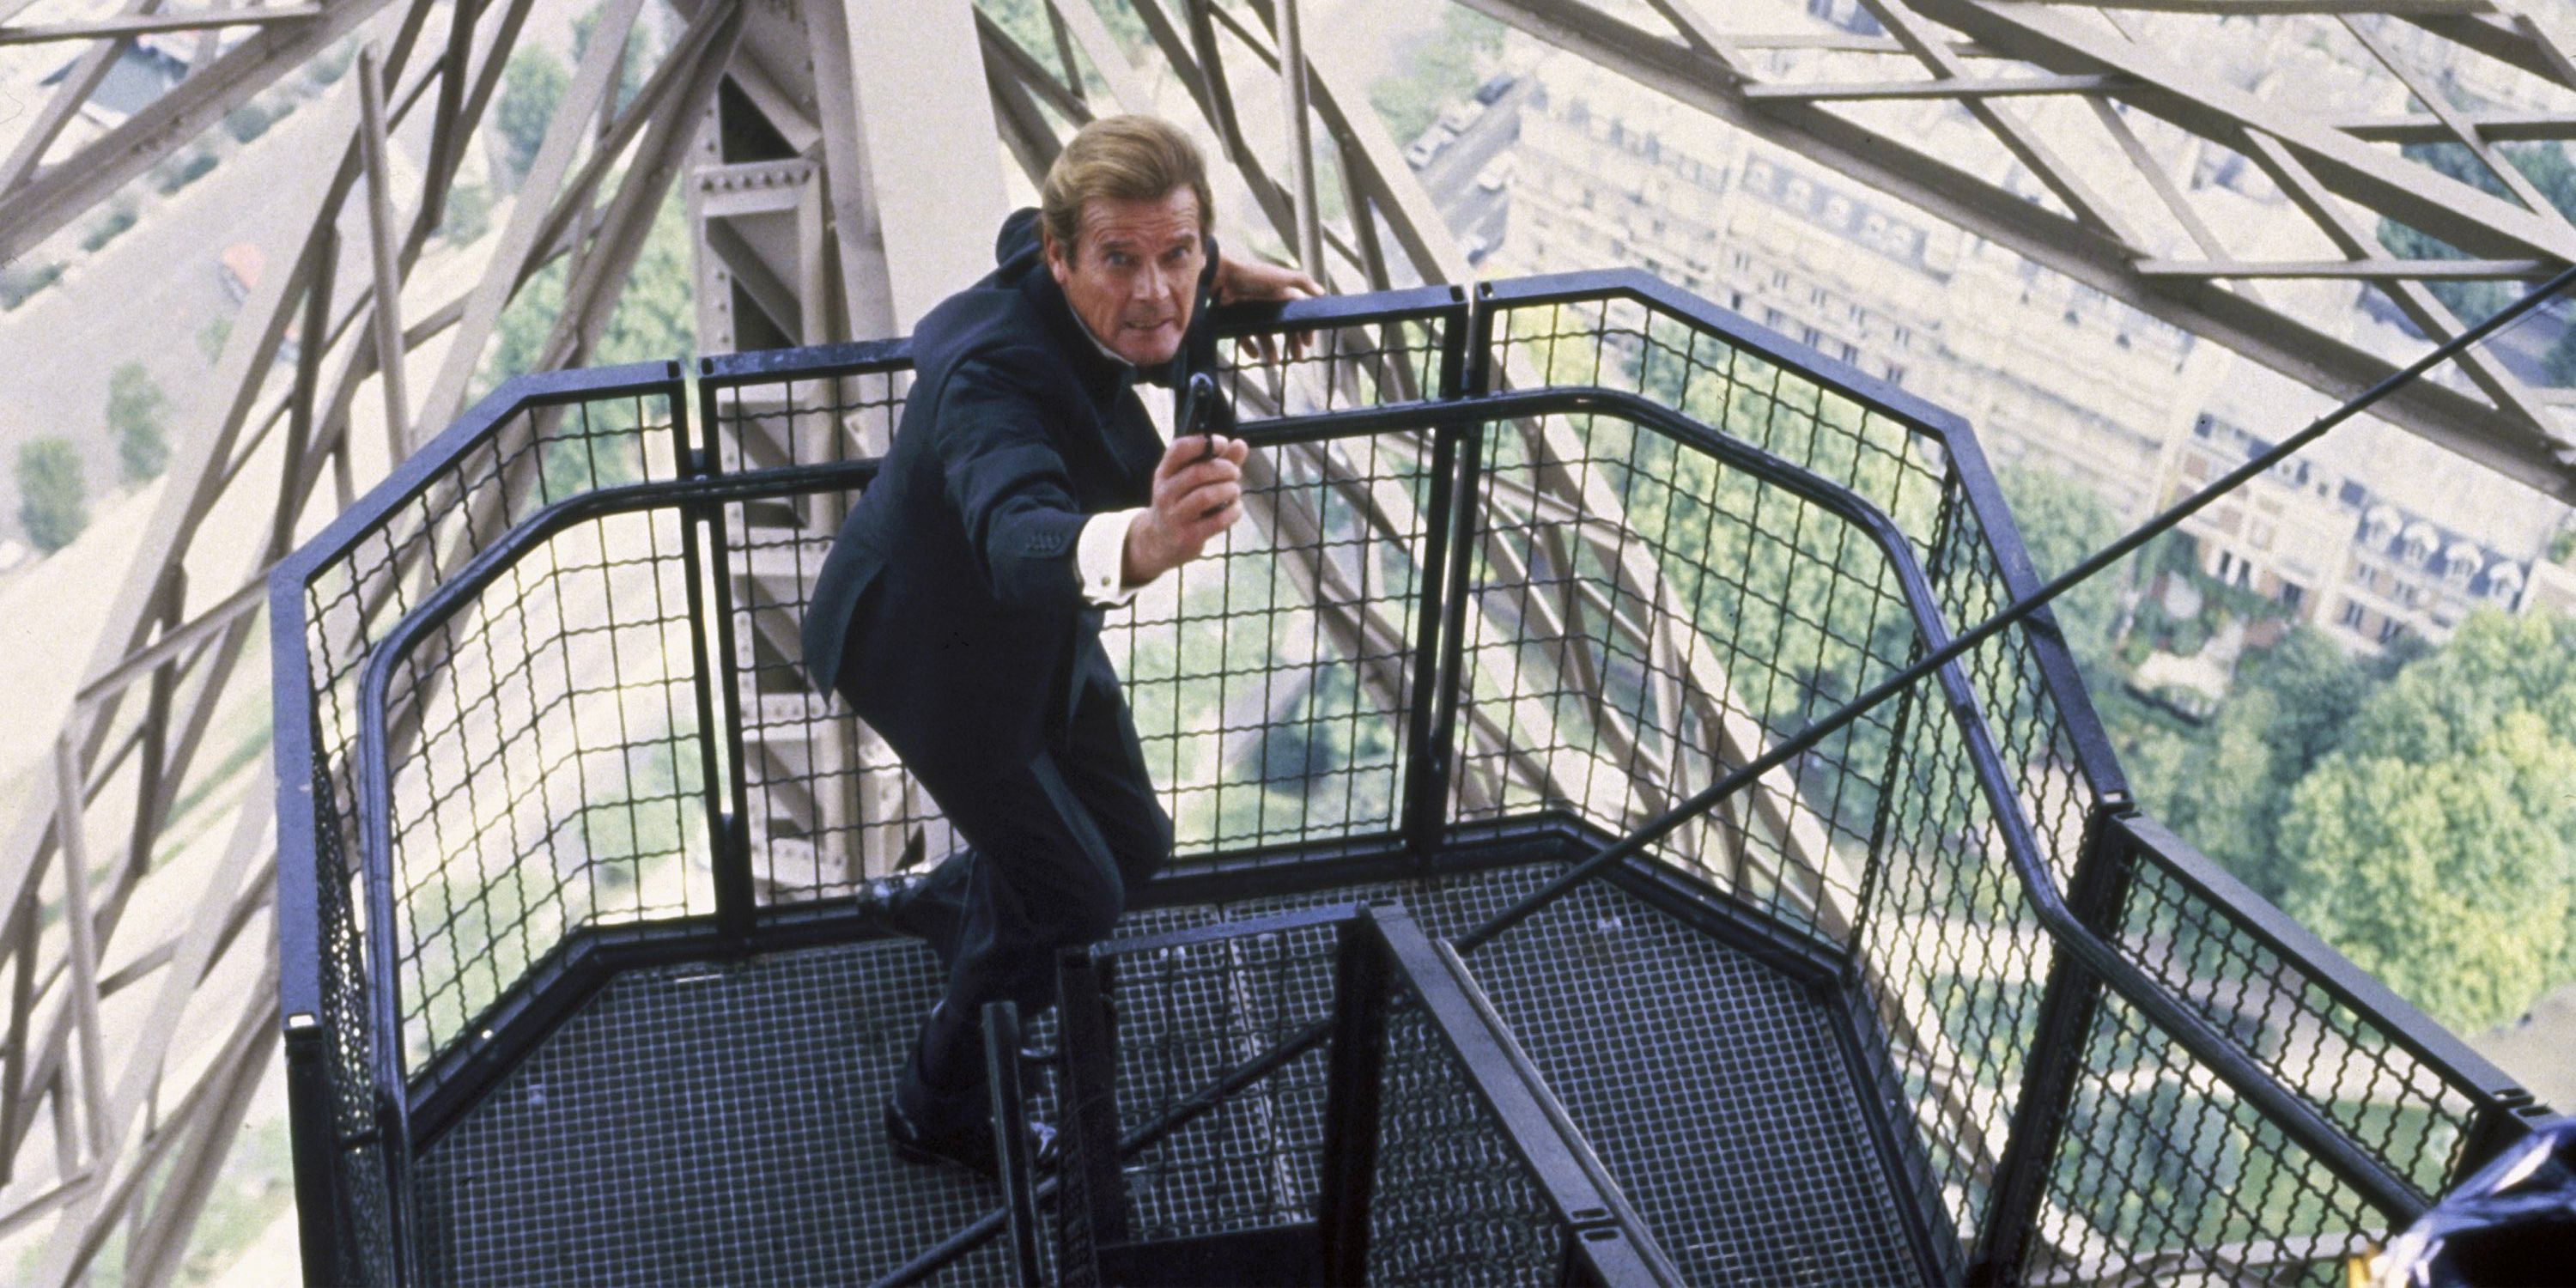 In Killing Eye, James Bond (Roger Moore) aims his weapon as he climbs a dangerously tall staircase